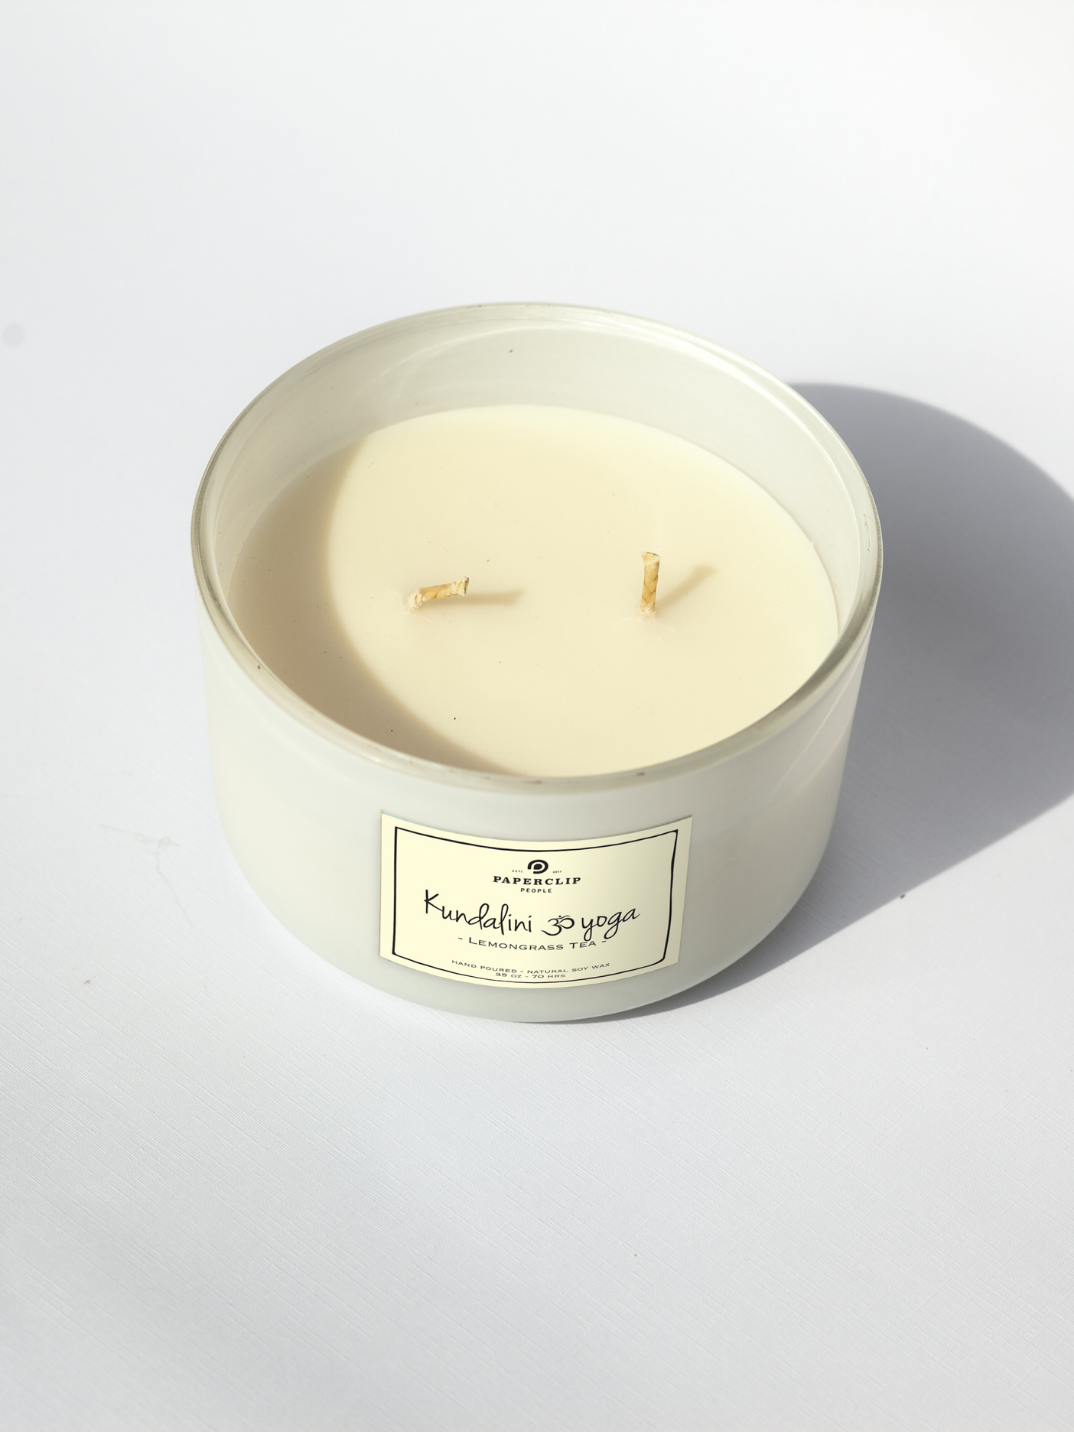 hand-poured natural soy wax candle made in Bali lemongrass tea scent